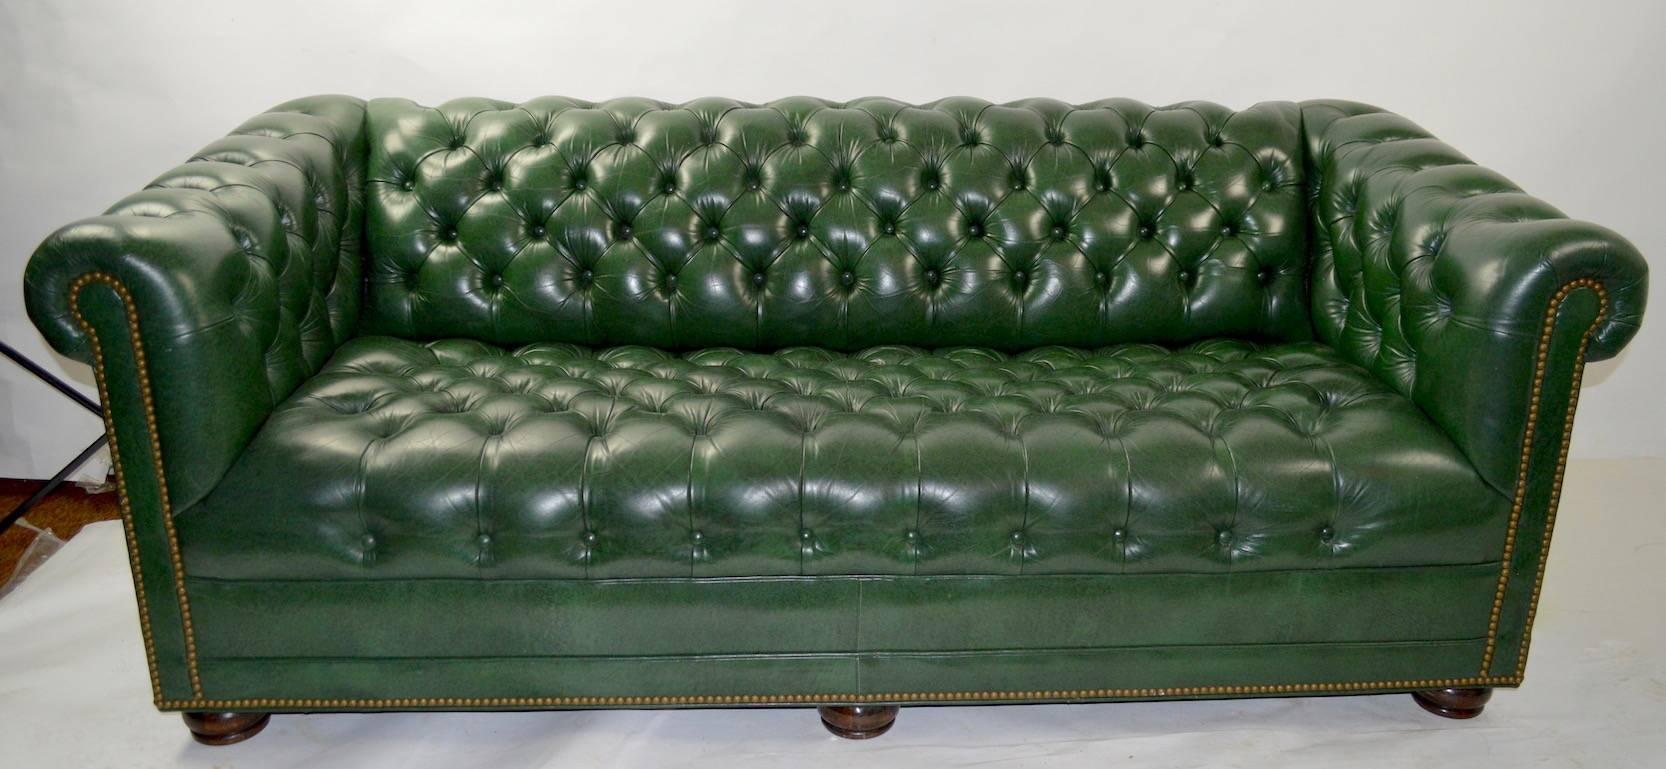 Chesterfield style box sofa with tufted leather upholstery on bun feet, by Hancock and Moore. The restrained Classical style works with traditional as well as modern interiors. This example is in excellent original condition, clean and ready to use.